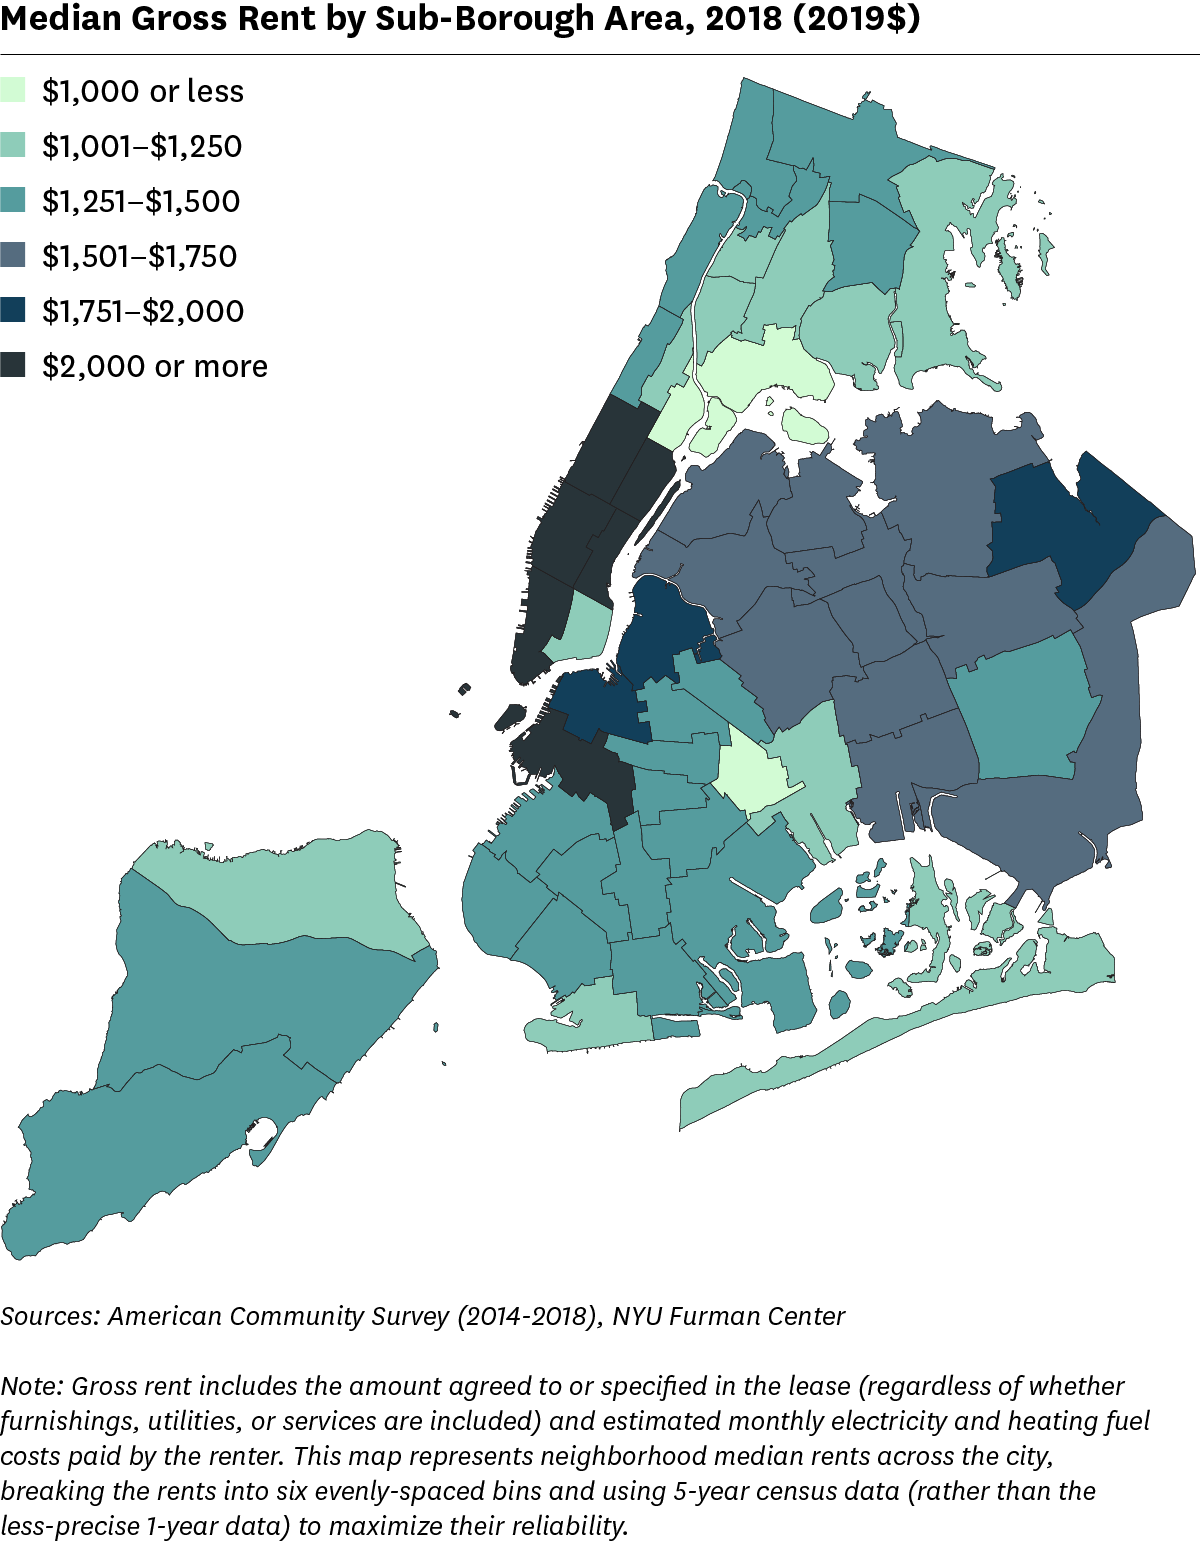 Map showing median gross rent across all sub-borough areas, 2018